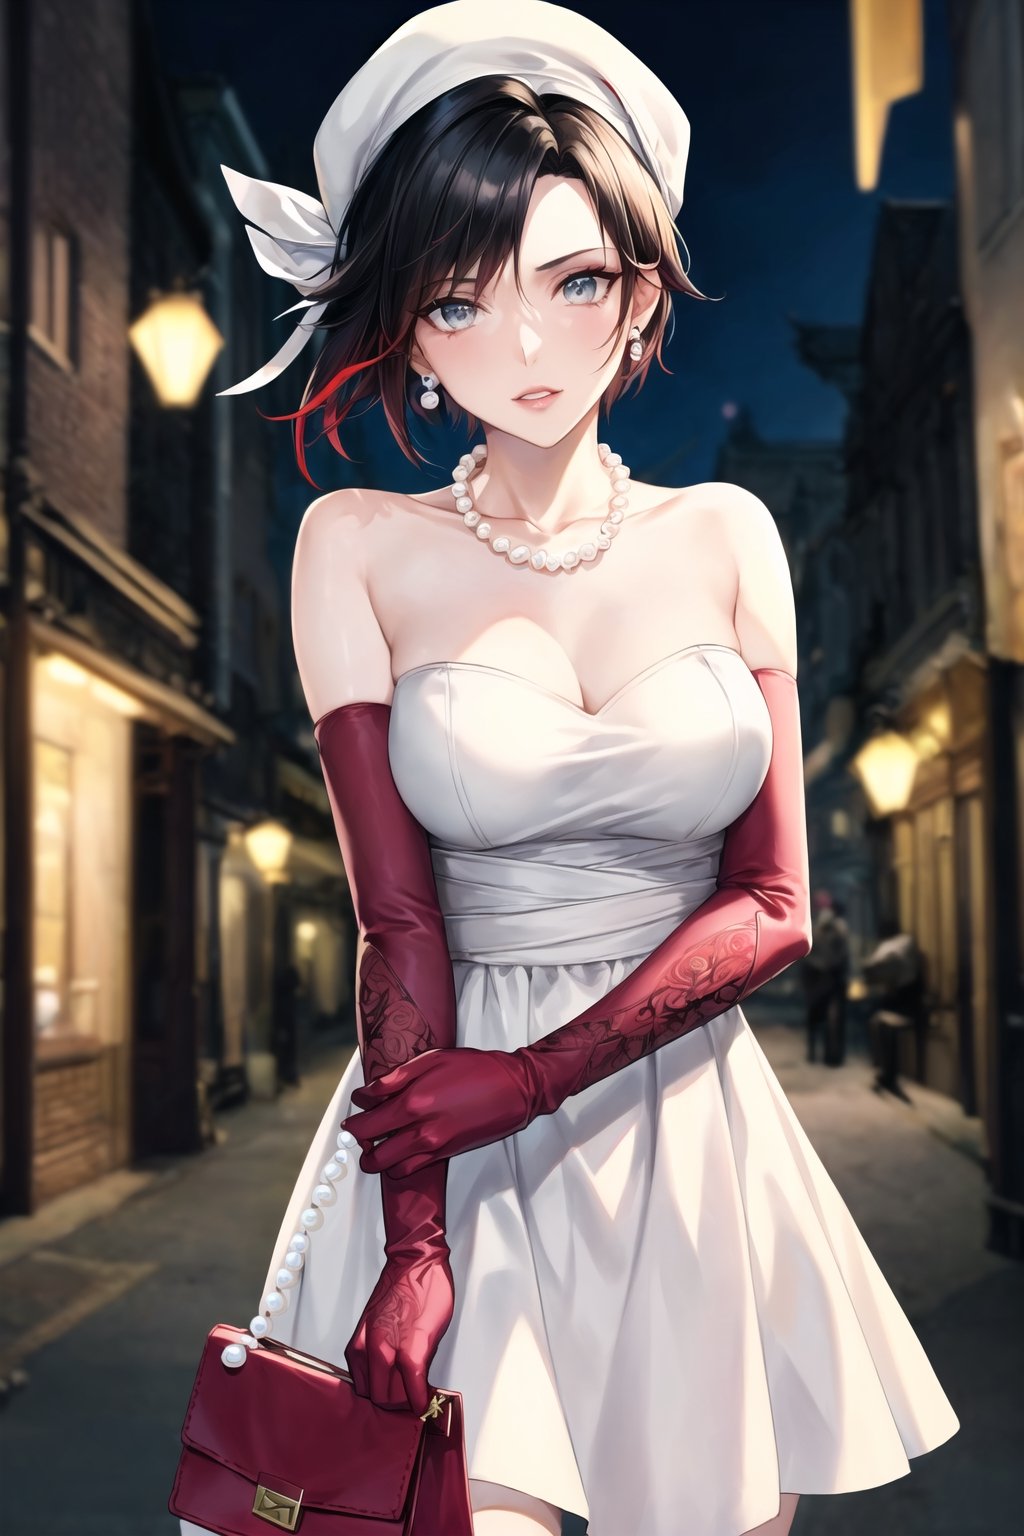 (best quality), (highly detailed), masterpiece, (official art), ,(ruby rose:1.2, hair messy bun:1.3), makeup:1.3, (lips:1.2), parted_lips, blue earrings:1.3,jewelery:1.3,((long sleeves,  elbow gloves:1.2,dress, ribbon, ccollarbone, white dress:1.3,  white headwear,  pearl necklace:1.3, holding, holding bag, v arms:1.3)), looking at viewer, china, asiática, city, night, sky,  (intricately detailed, hyperdetailed), blurry background,depth of field, best quality, masterpiece, intricate details, tonemapping, sharp focus, hyper detailed, trending on Artstation,1 girl, high res, official art,StandingAtAttention,bestiality